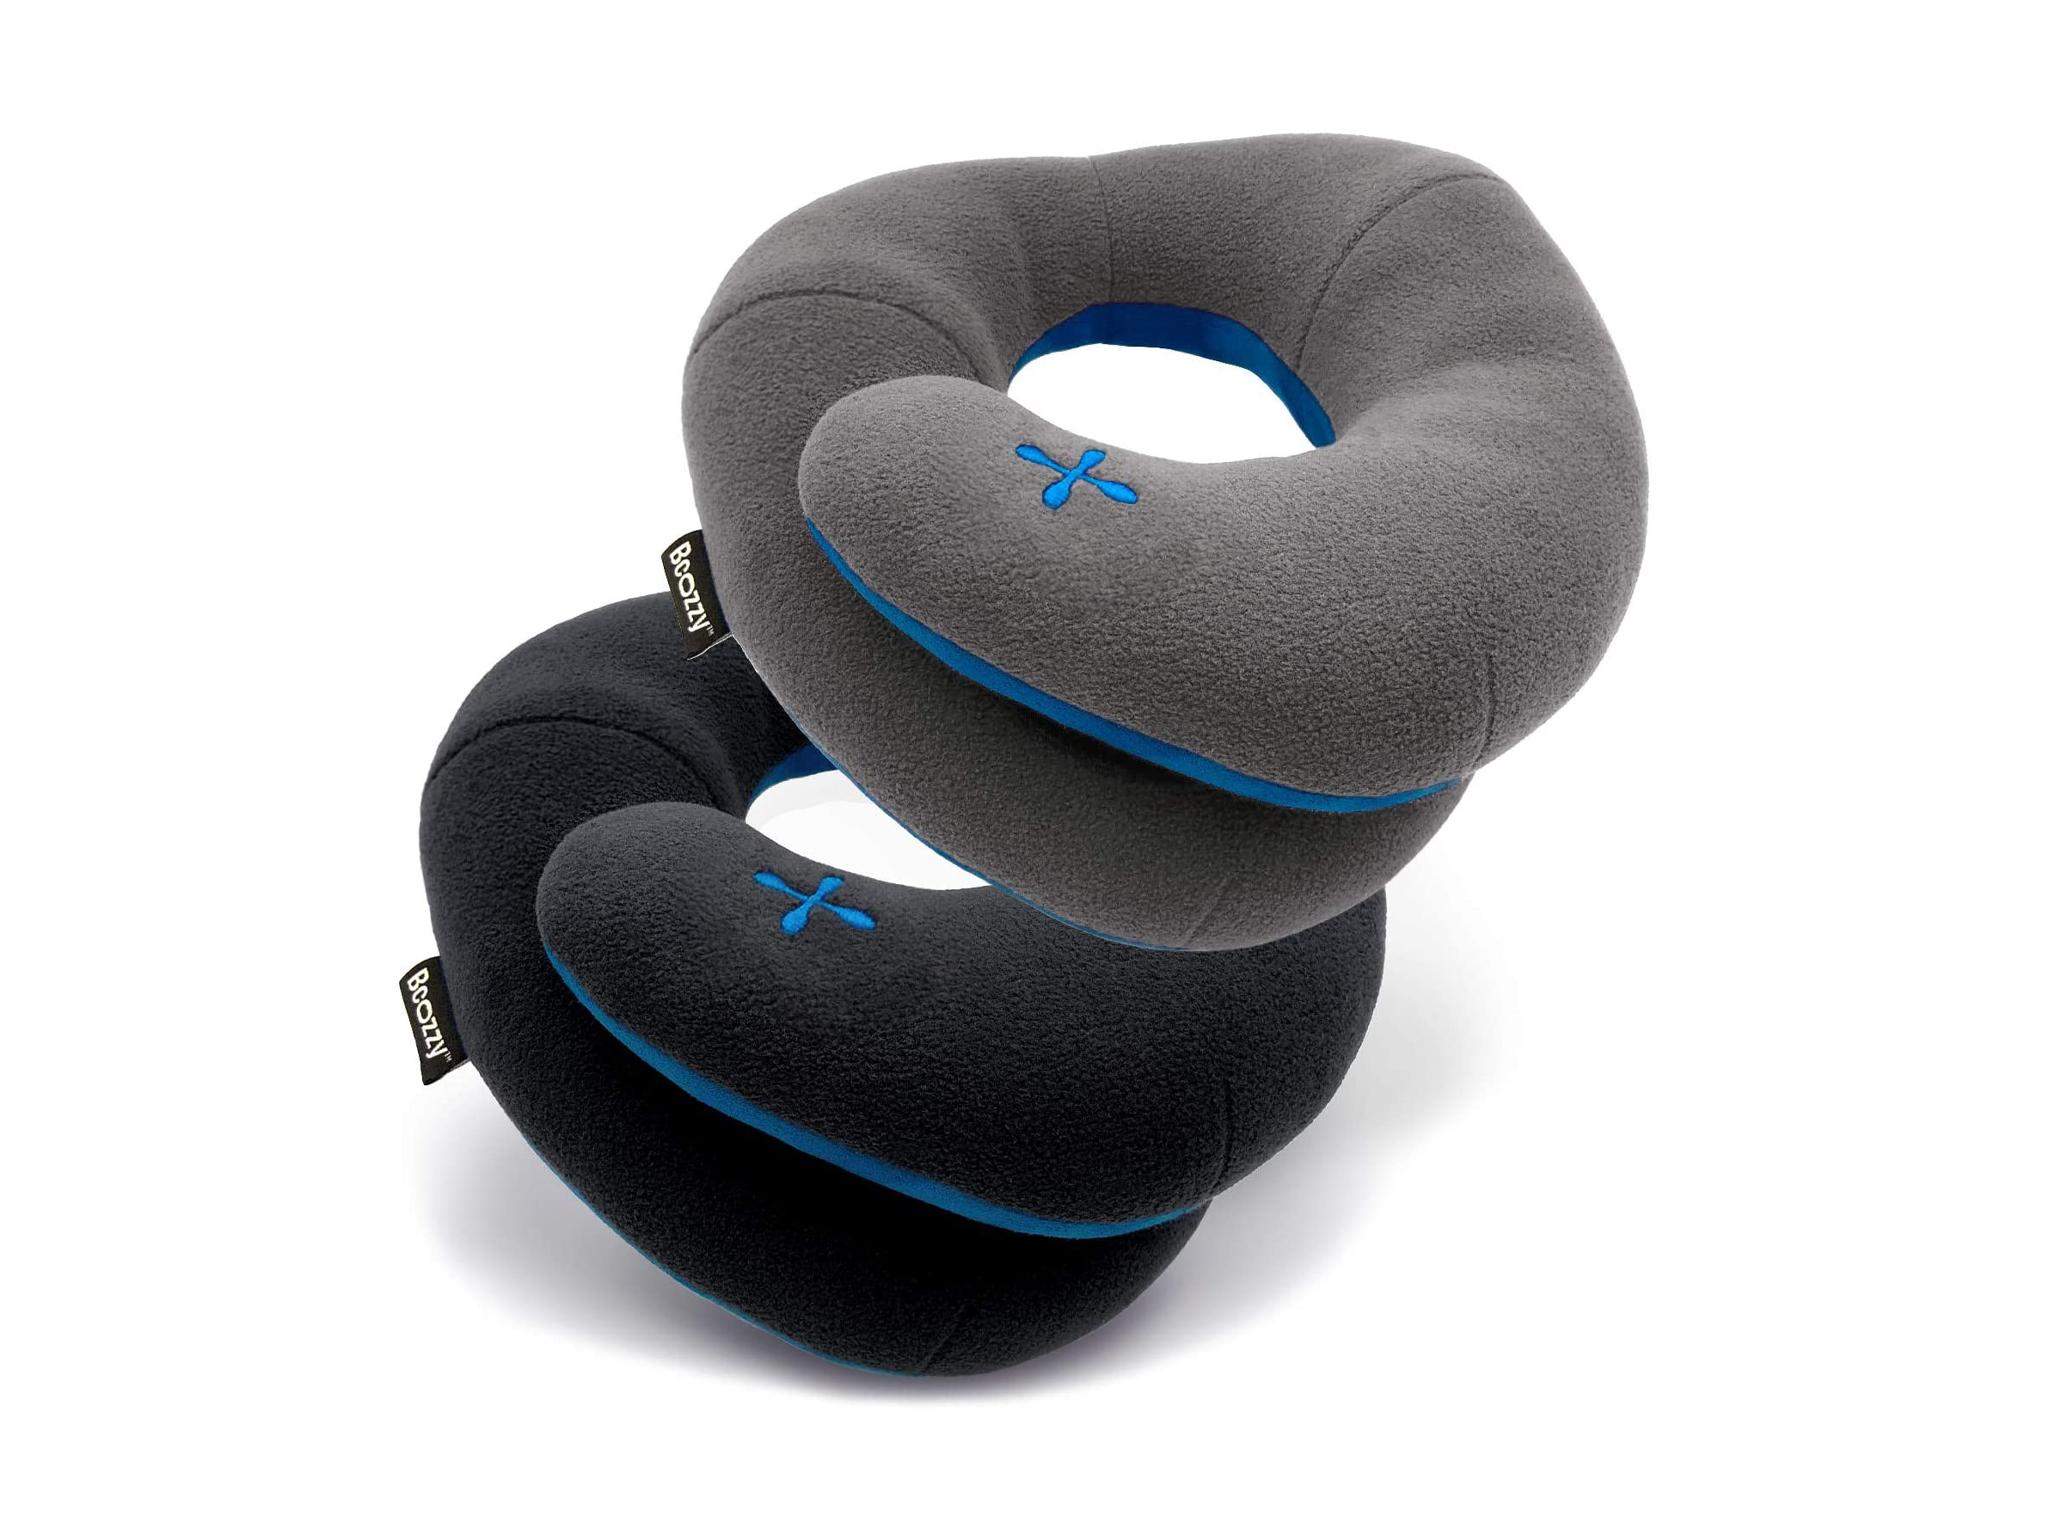 Soft Memory Foam Pain Relief- For Airplanes Navy Xtra-Comfort Headrest Travel Pillow- Accessories For Long Trips- Inflatable Neck Support For Sleeping Traveling Cars Campers- Women Men and Kids 